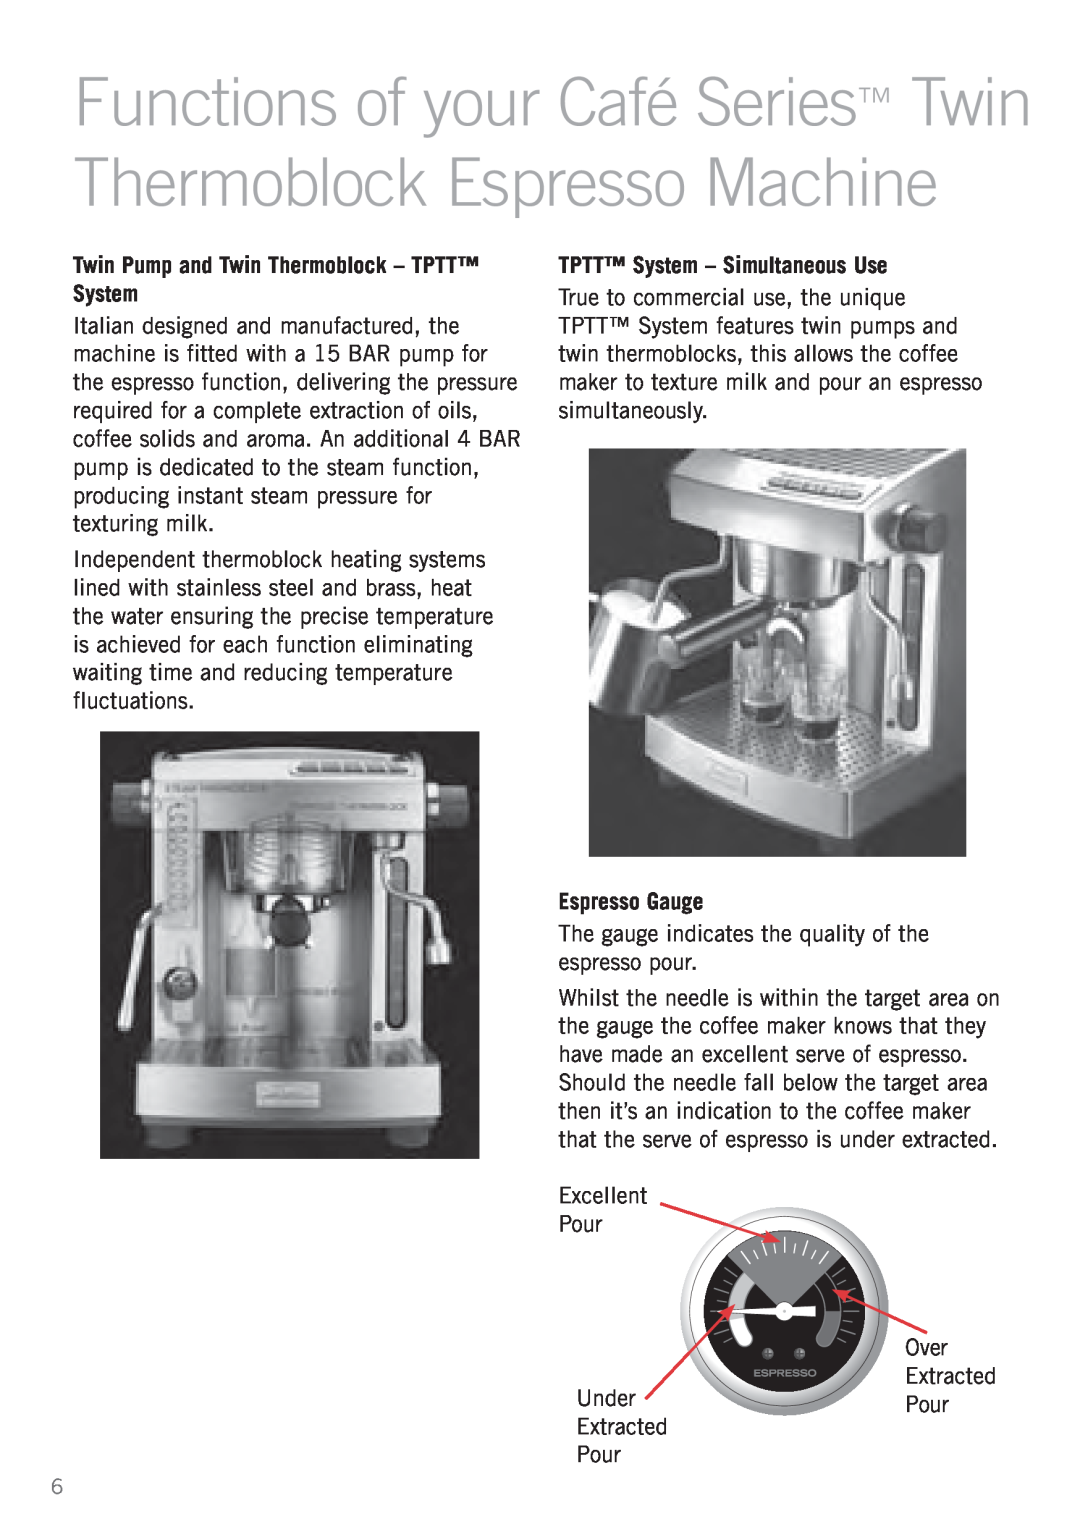 Sunbeam EM8900 manual Functions of your Café Series Twin Thermoblock Espresso Machine, TPTT System - Simultaneous Use 